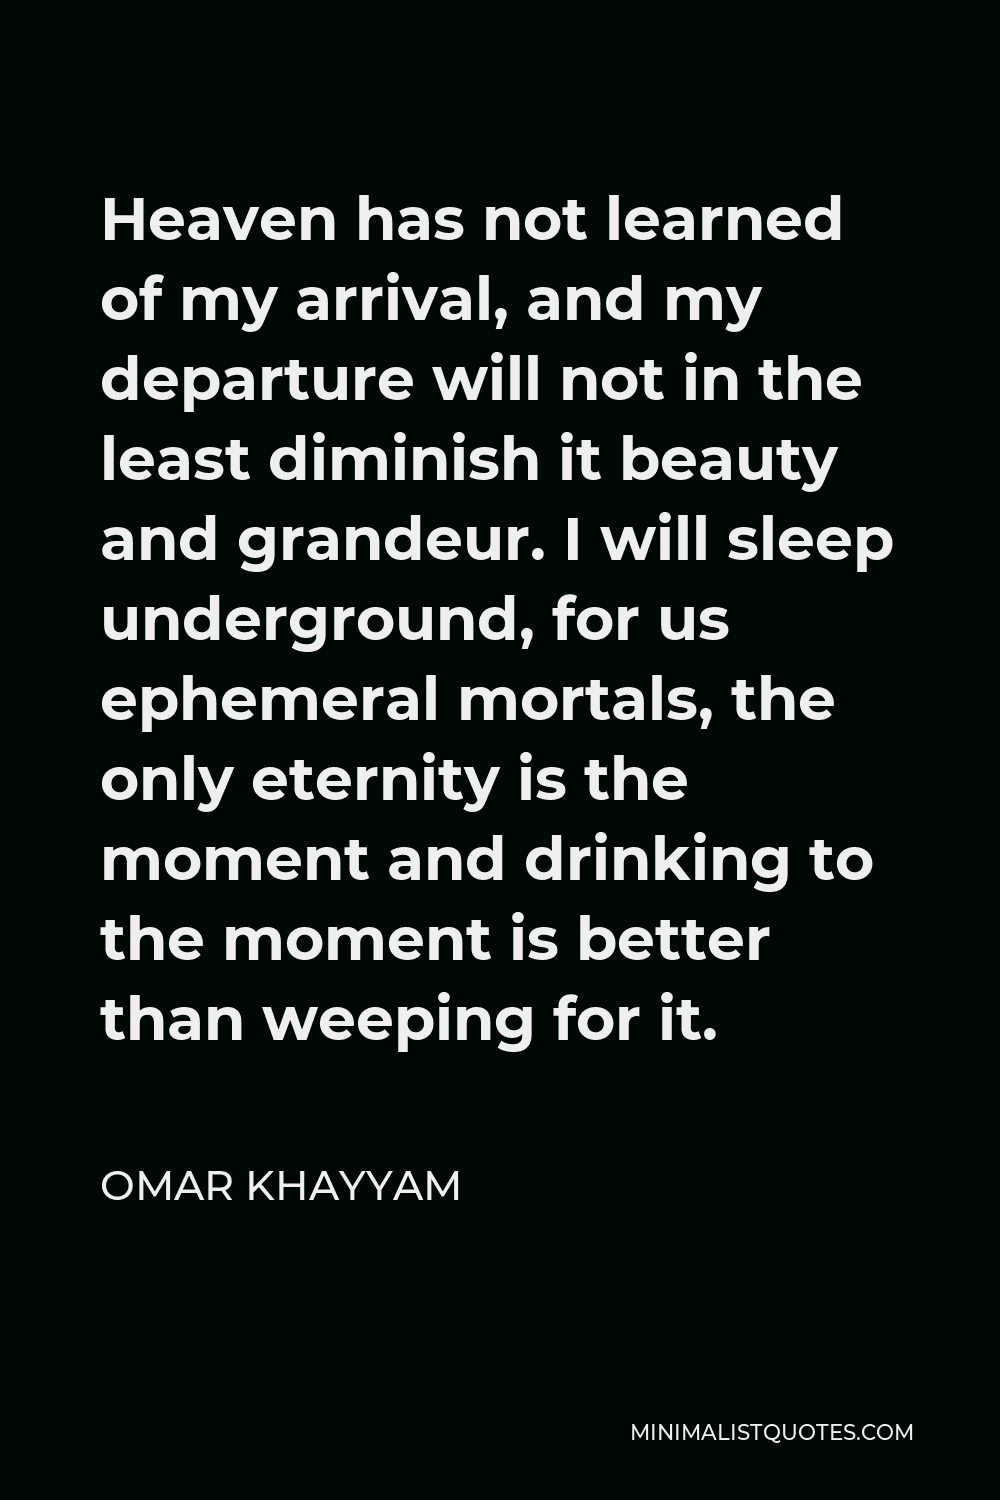 Omar Khayyam Quote - Heaven has not learned of my arrival, and my departure will not in the least diminish it beauty and grandeur. I will sleep underground, for us ephemeral mortals, the only eternity is the moment and drinking to the moment is better than weeping for it.